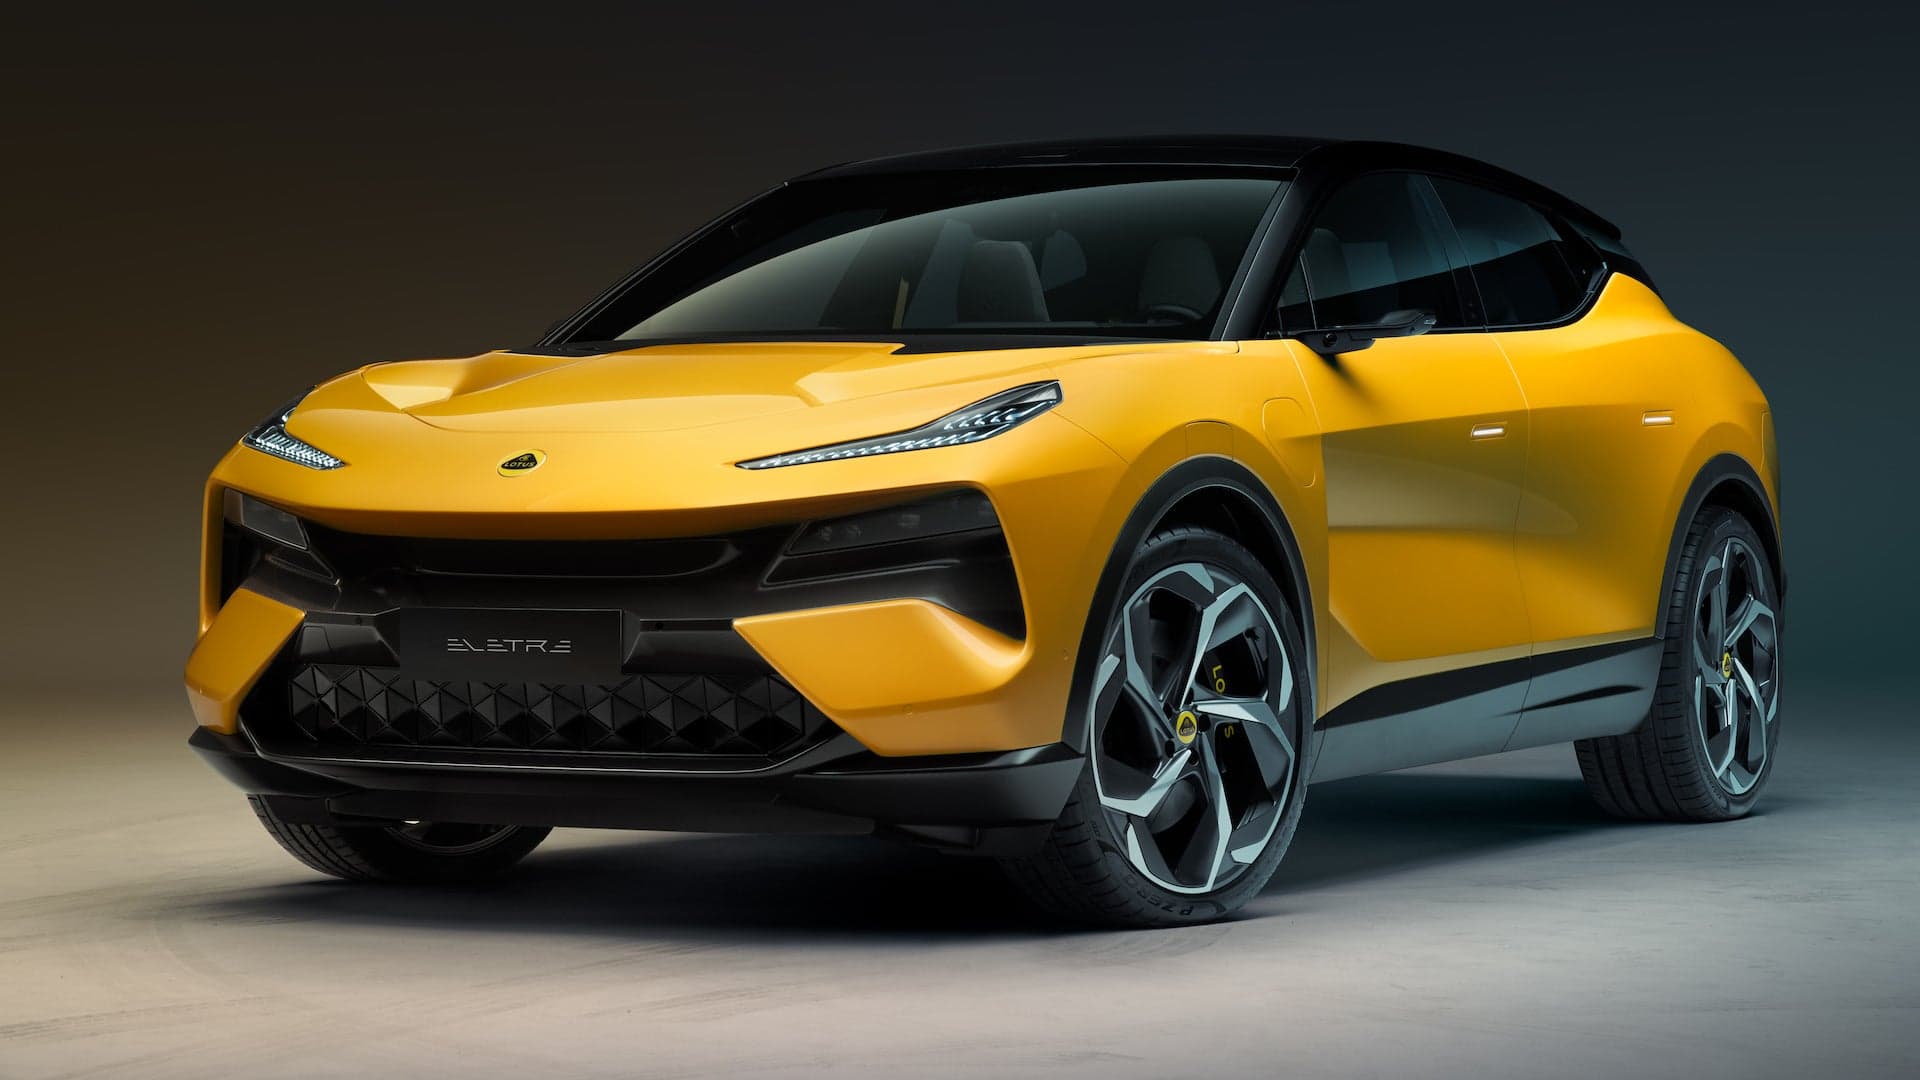 2023 Lotus Eletre SUV: Lidar, Batteries, and 0-60 in Under 3 Seconds